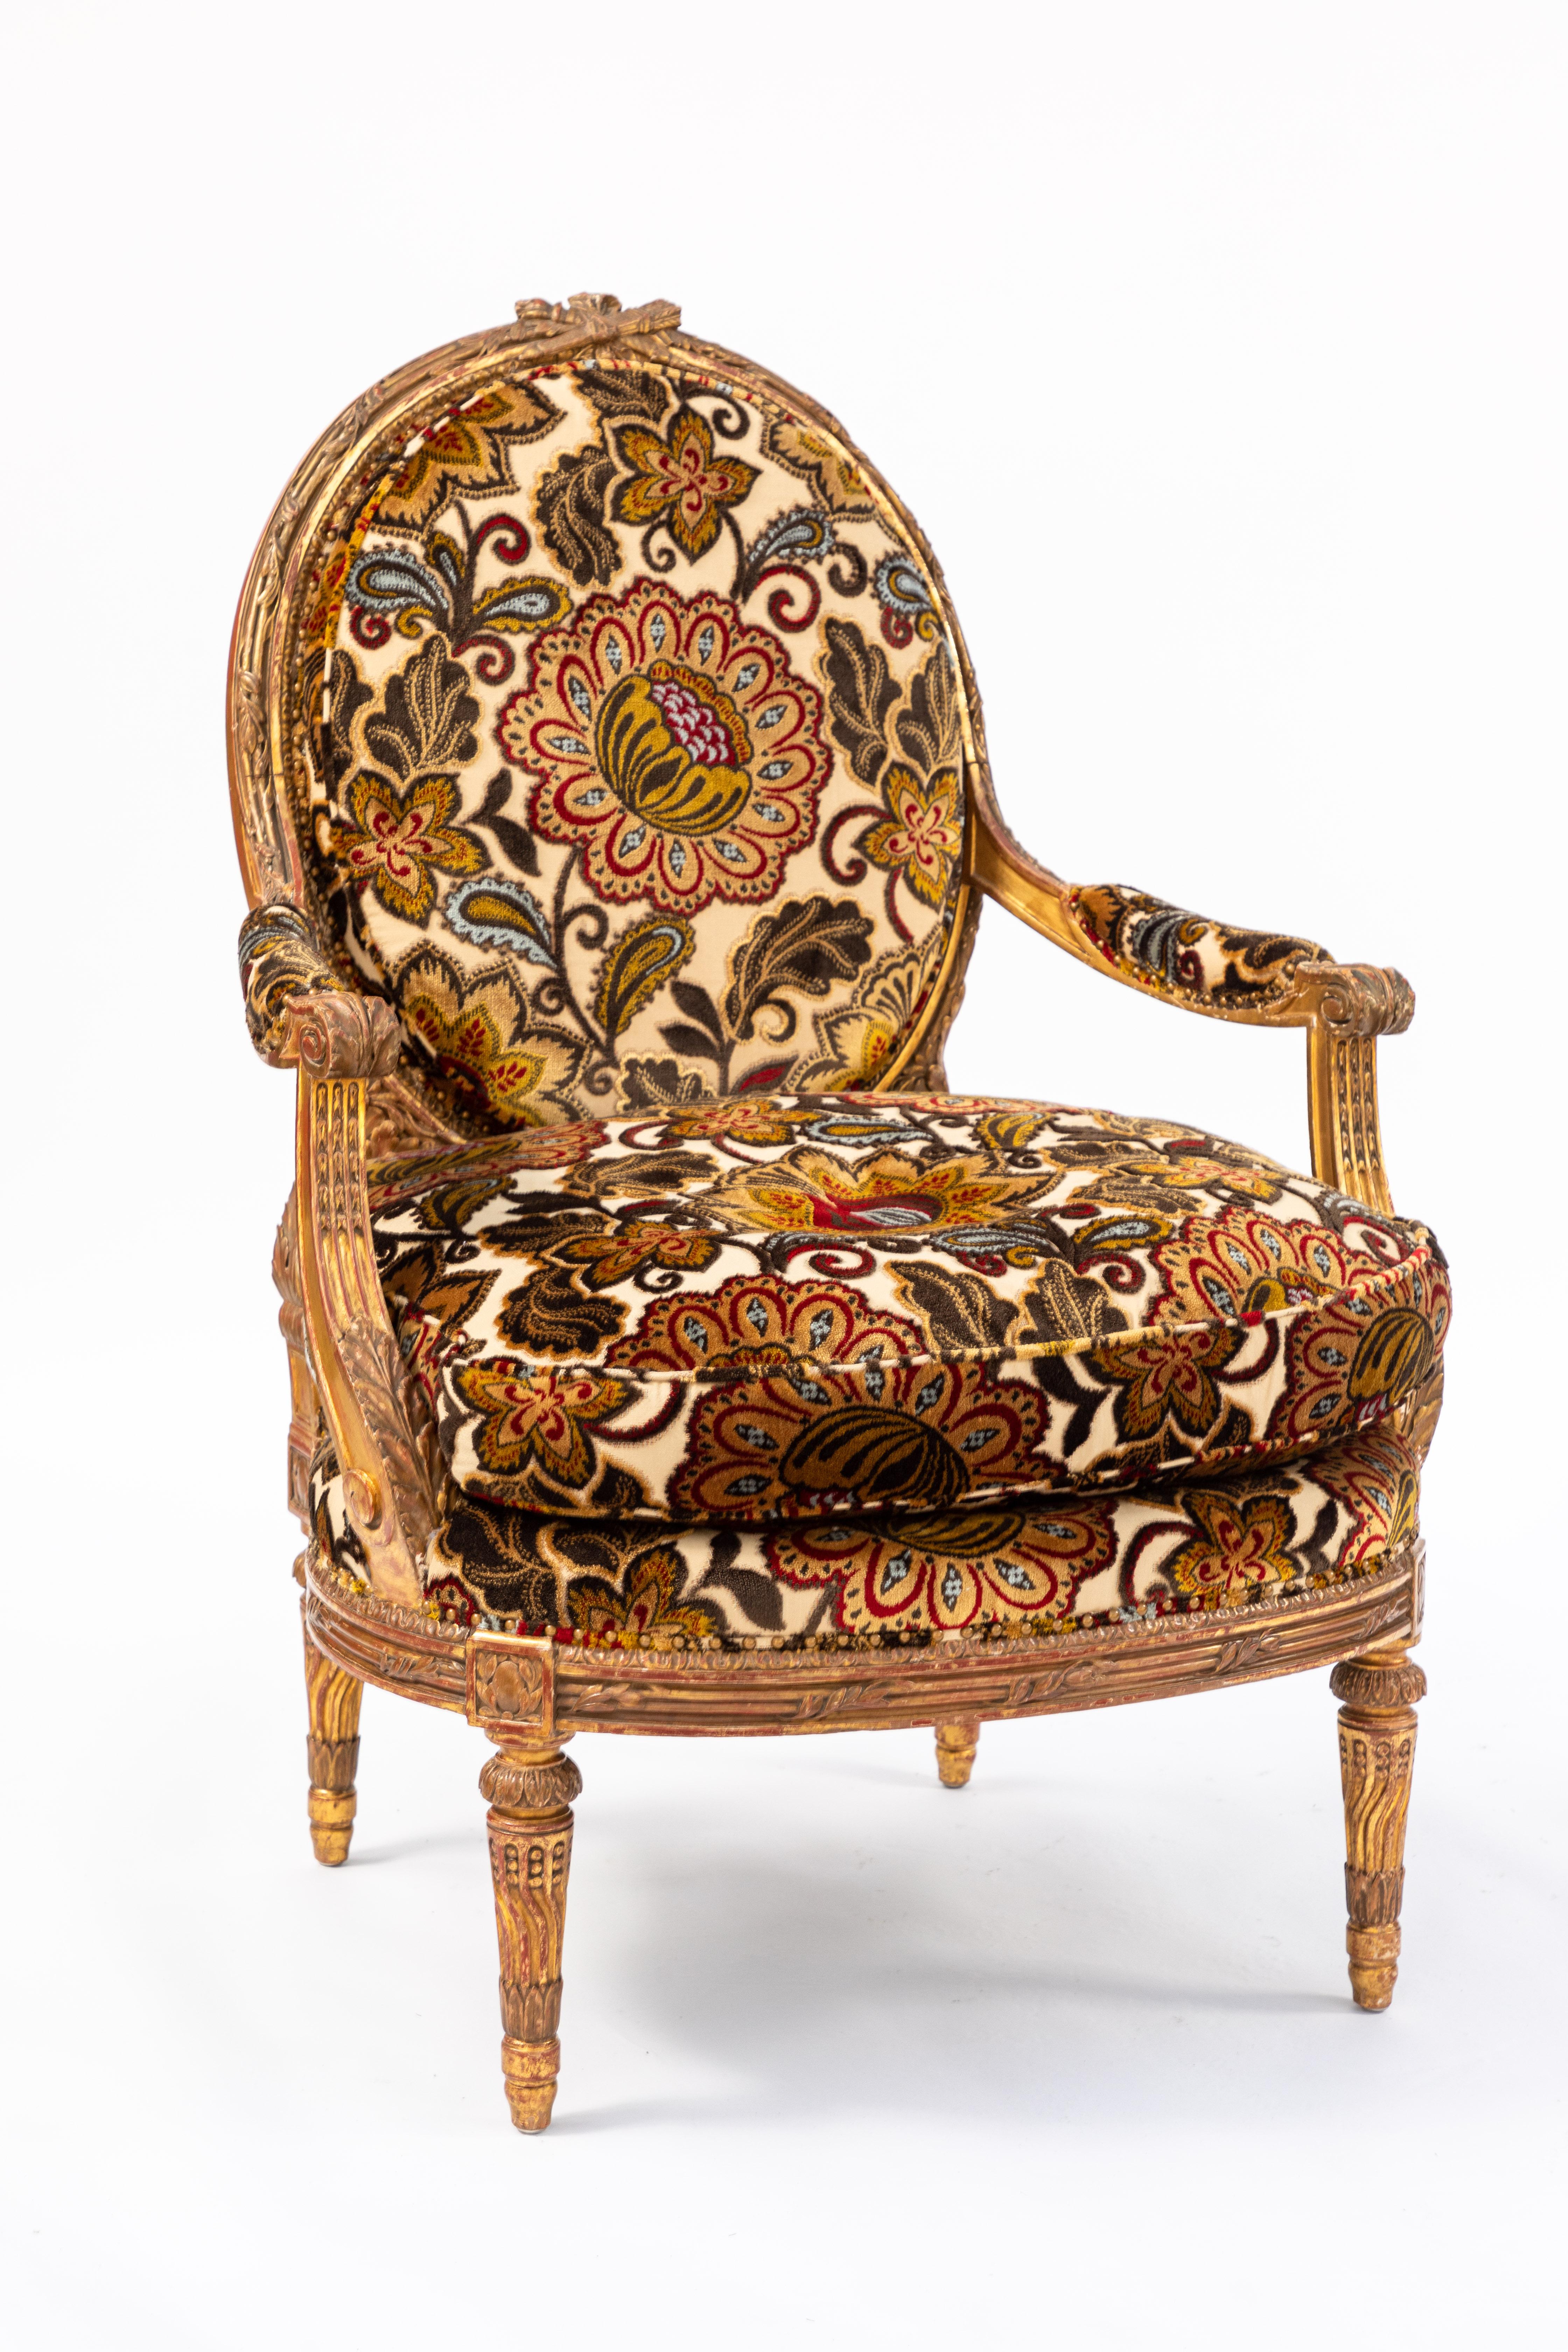 Pair of fine 19th century French carved giltwood armchairs with newly upholstered cut velvet floral fabric.